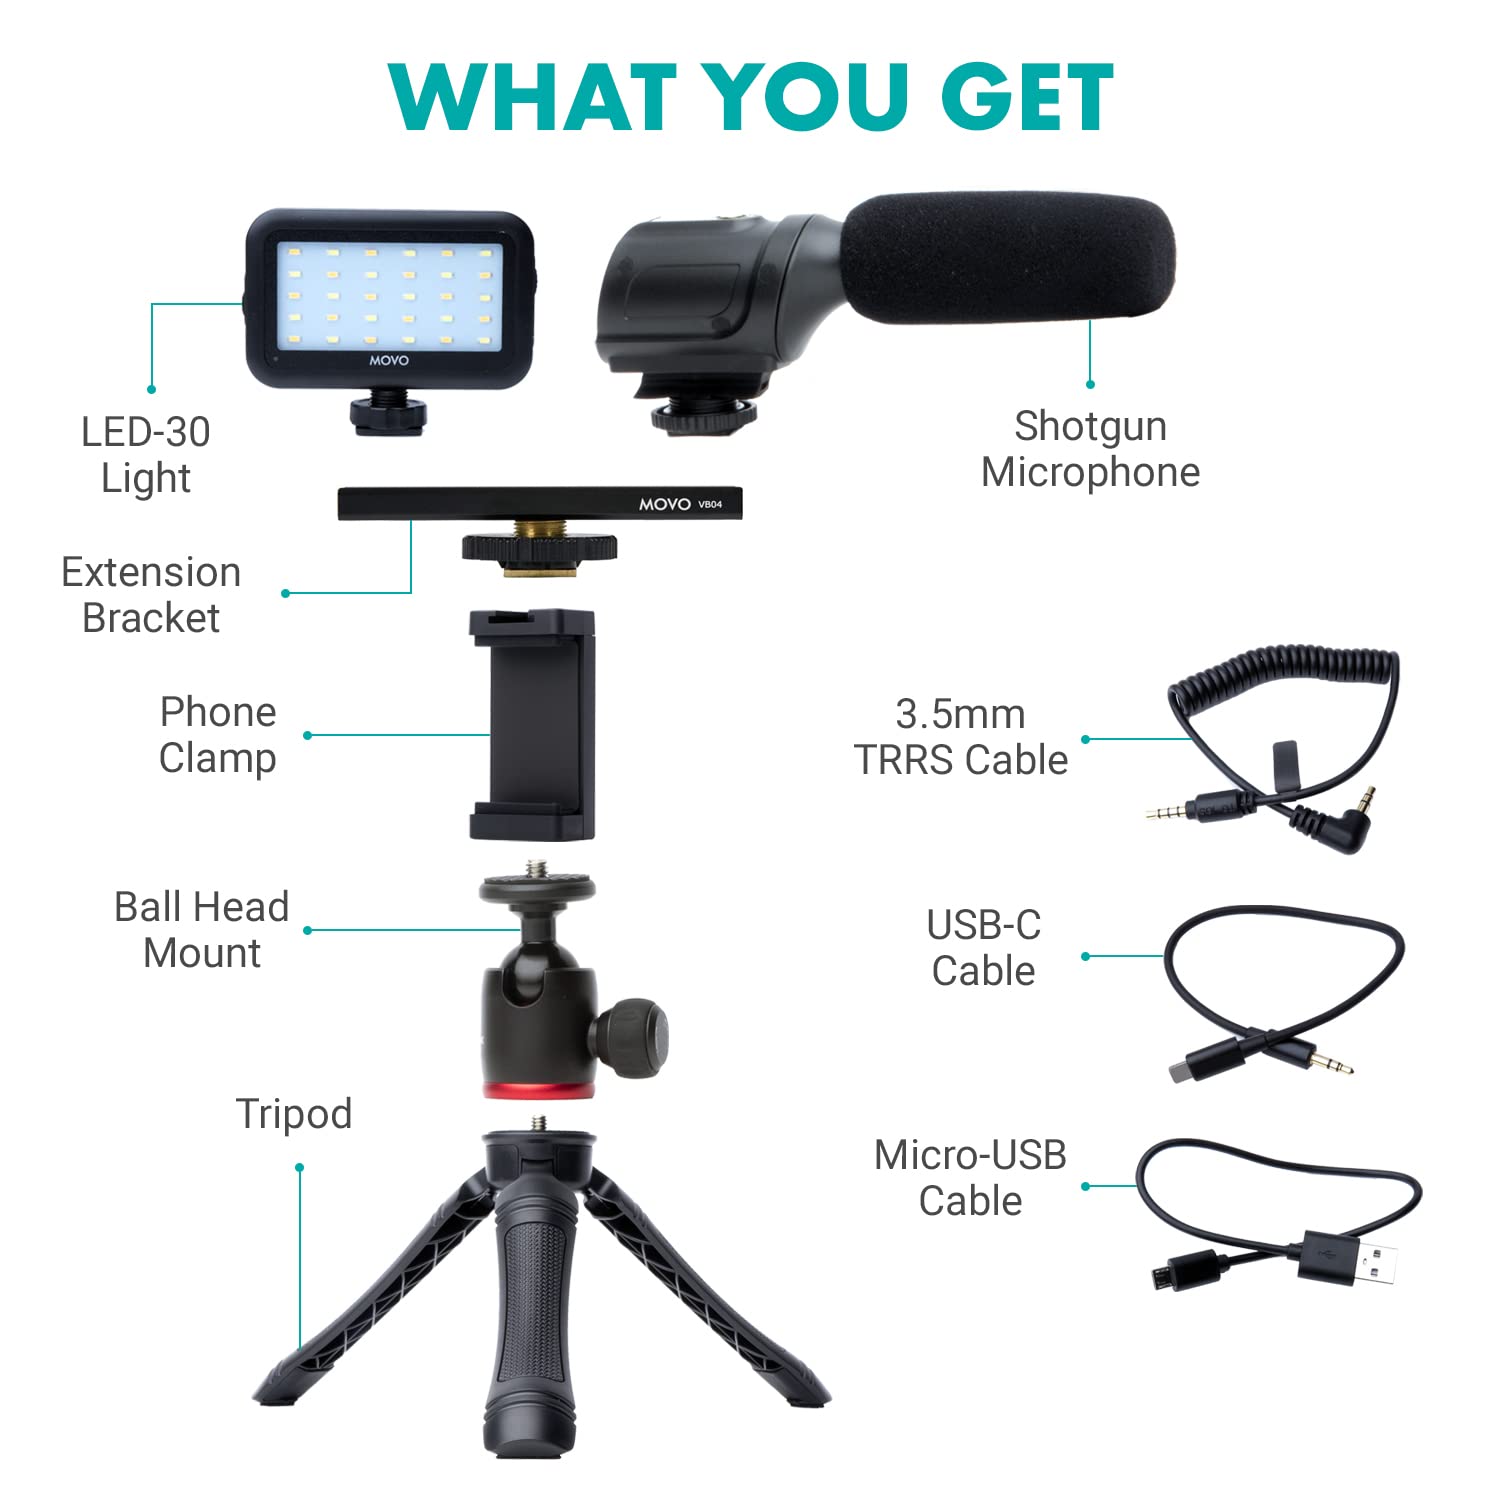 Movo uVlogger- Android/USB-C Compatible Vlogging Kit Phone Video Kit Accessories: Phone Tripod, Phone Mount, LED Light and Cellphone Shotgun Microphone for Phone Video Recording for YouTube, Vlog  - Like New